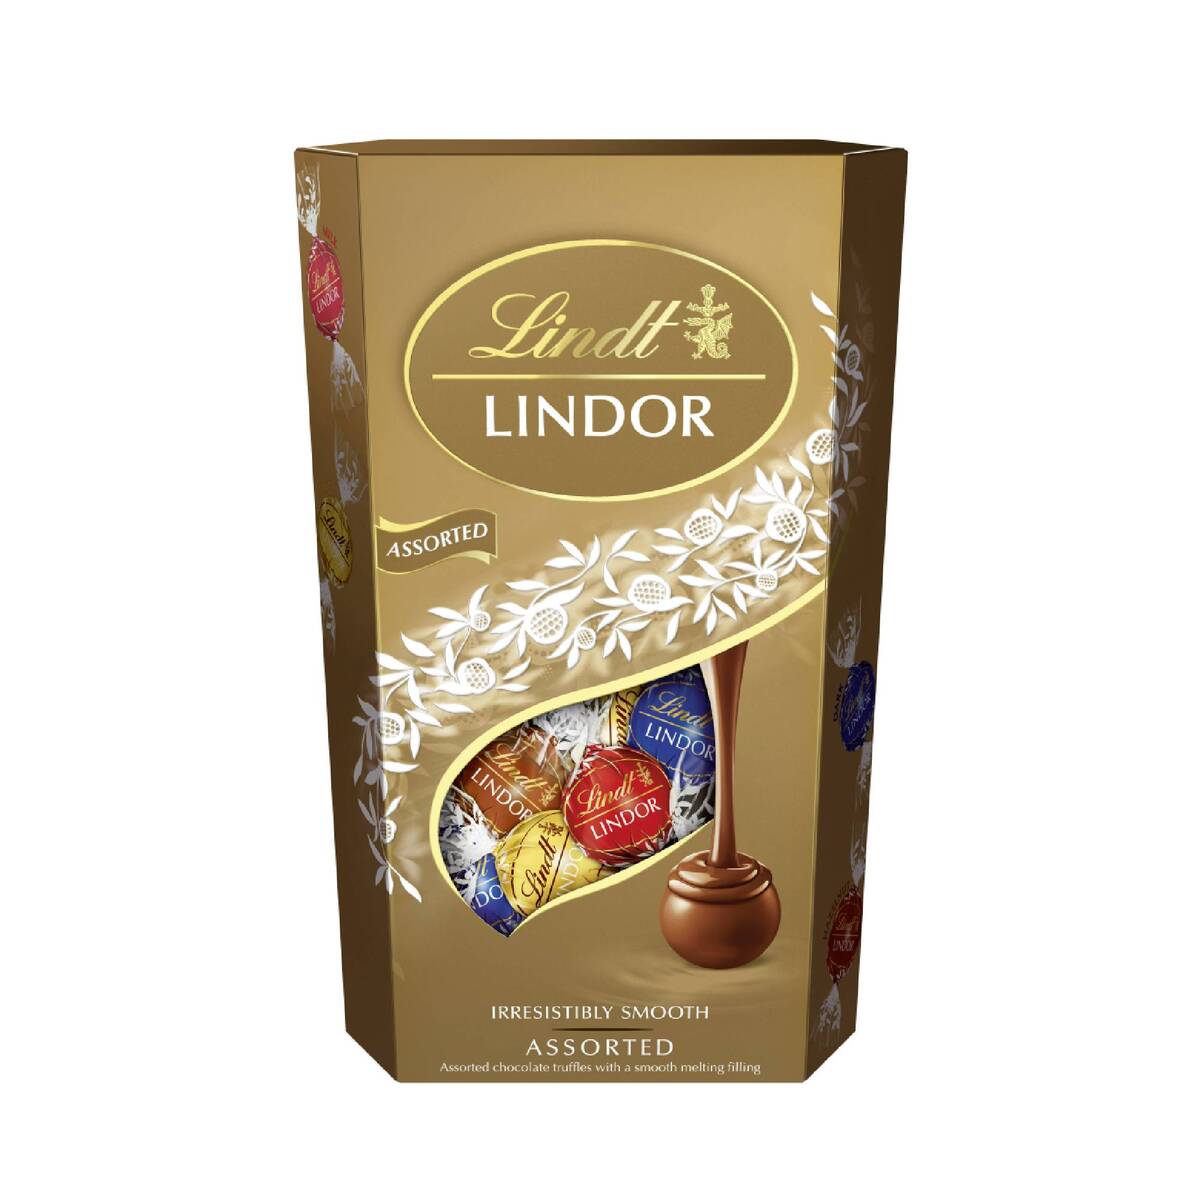 Lindt Lindor Irresistibly Smooth Assorted Chocolate, 600 g